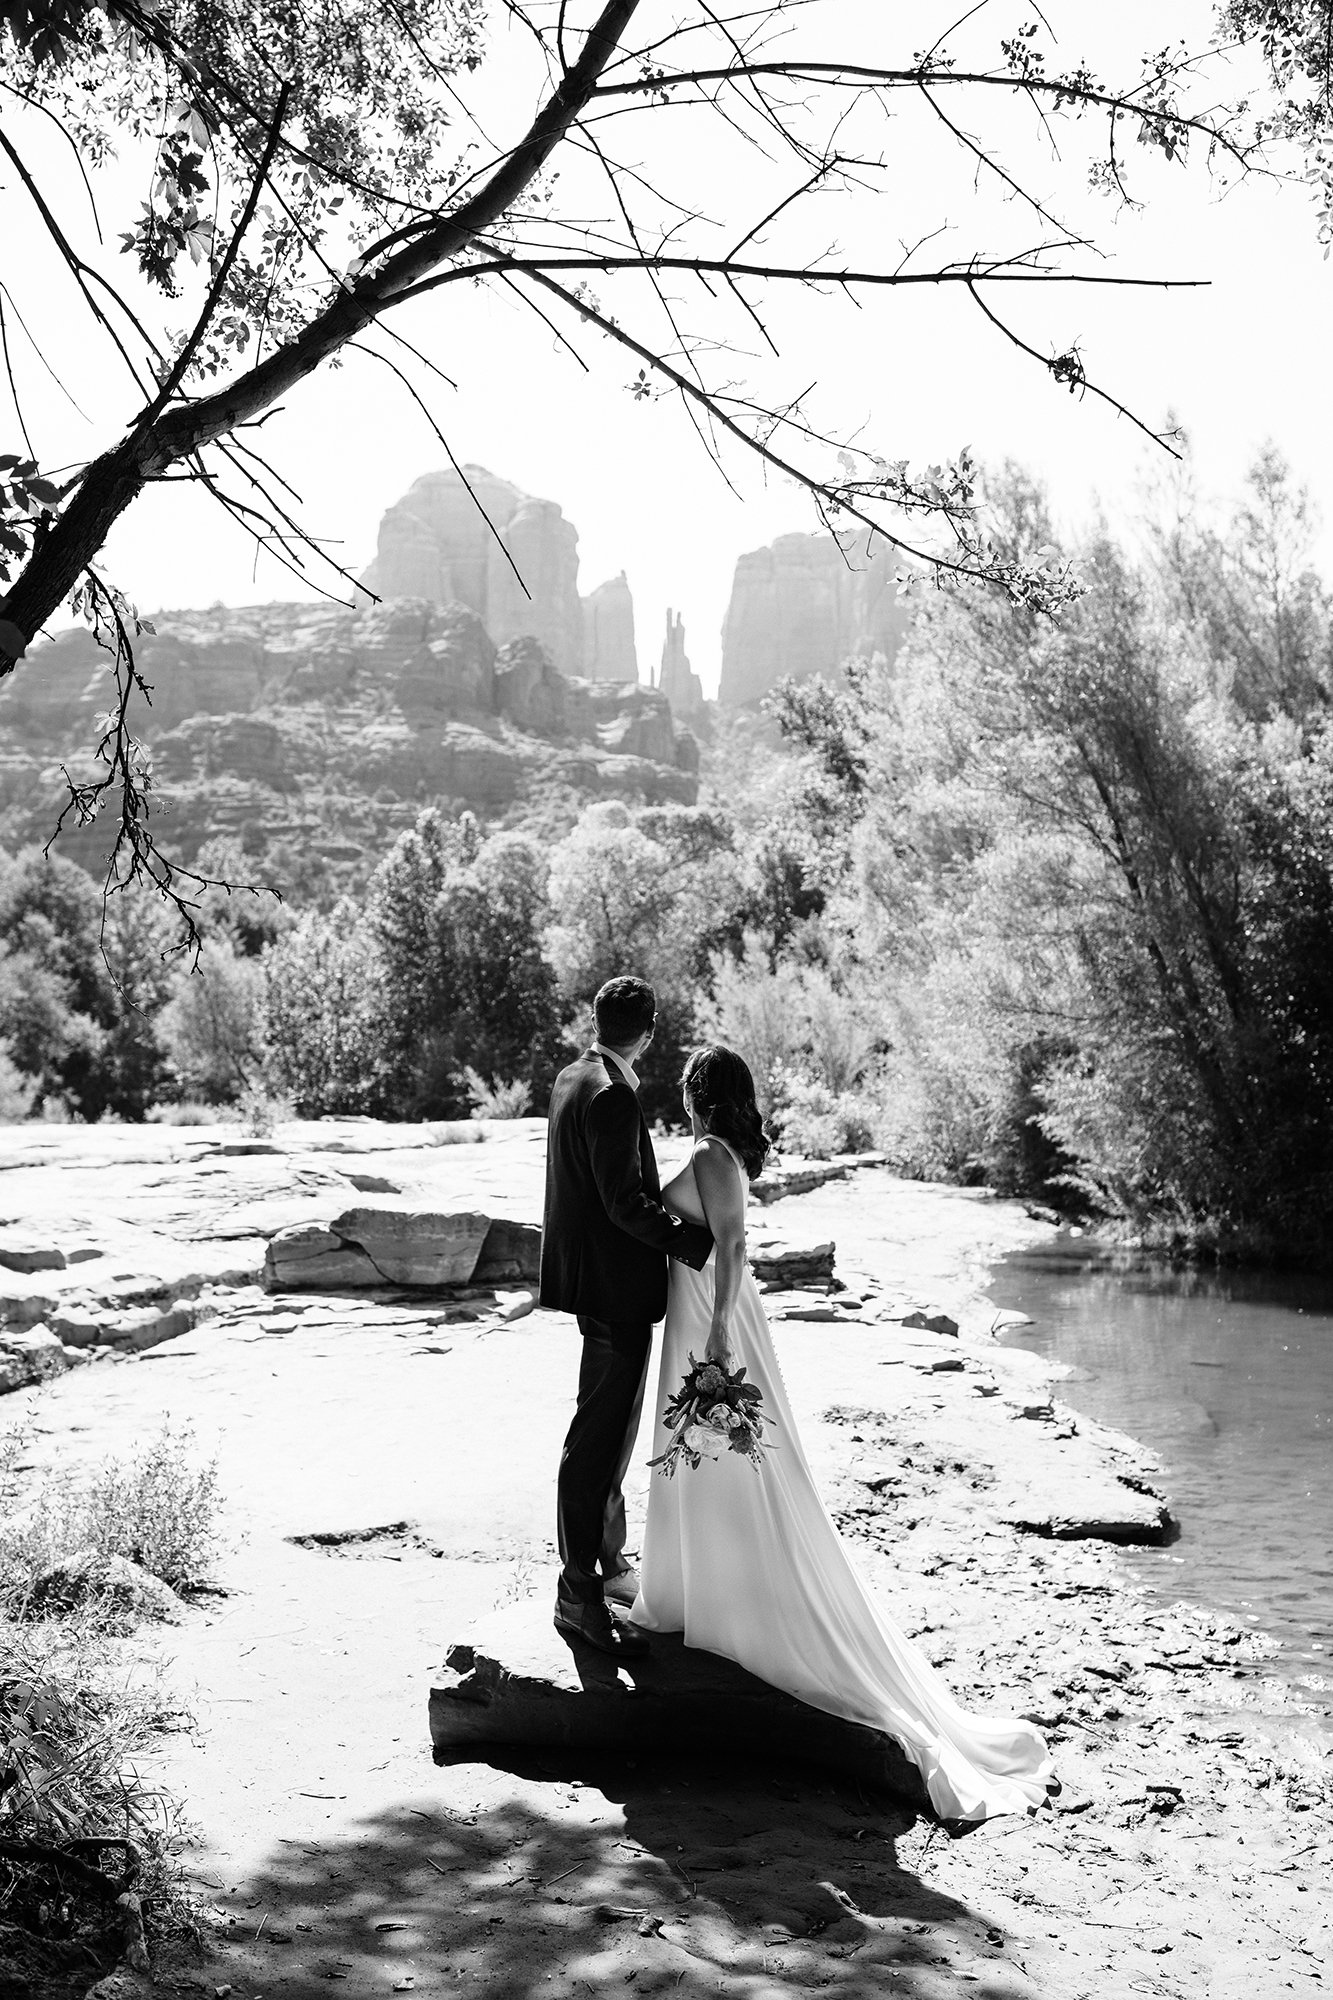 Stephanie and Matthew hold eachother close and look out at the Sedona landscape in this black and white wedding photo